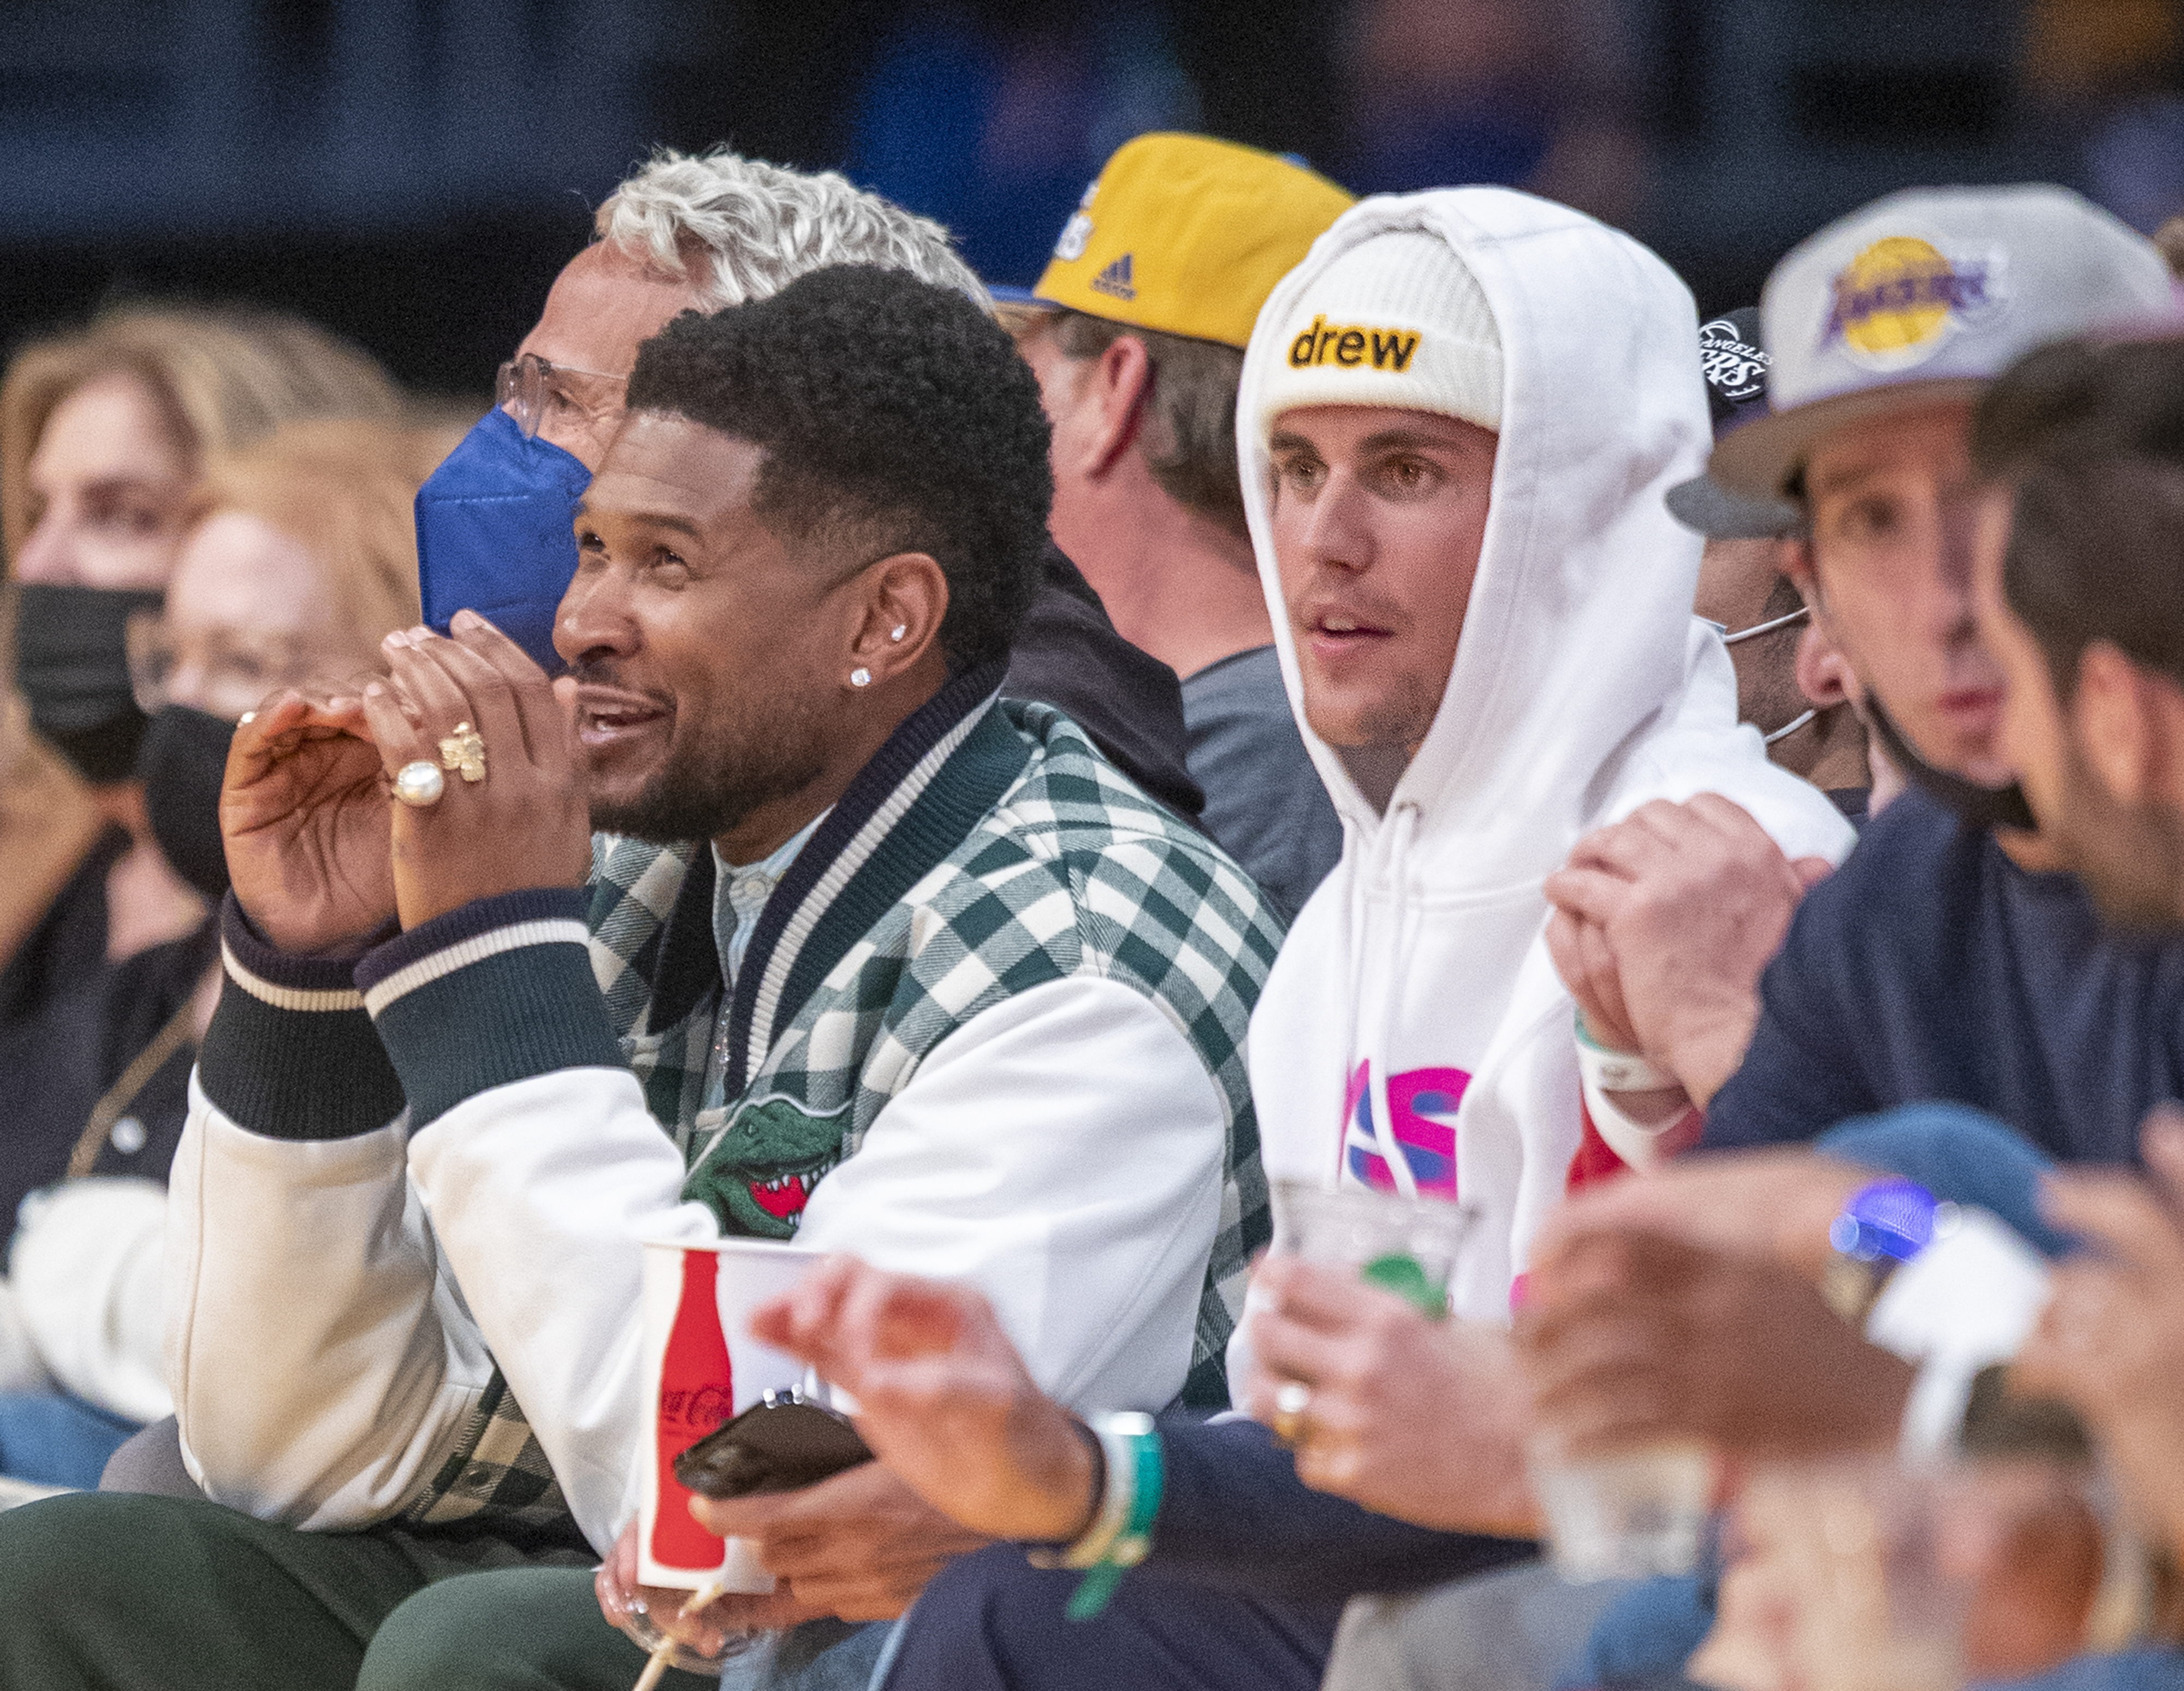 Usher and Justin Bieber at a sporting event